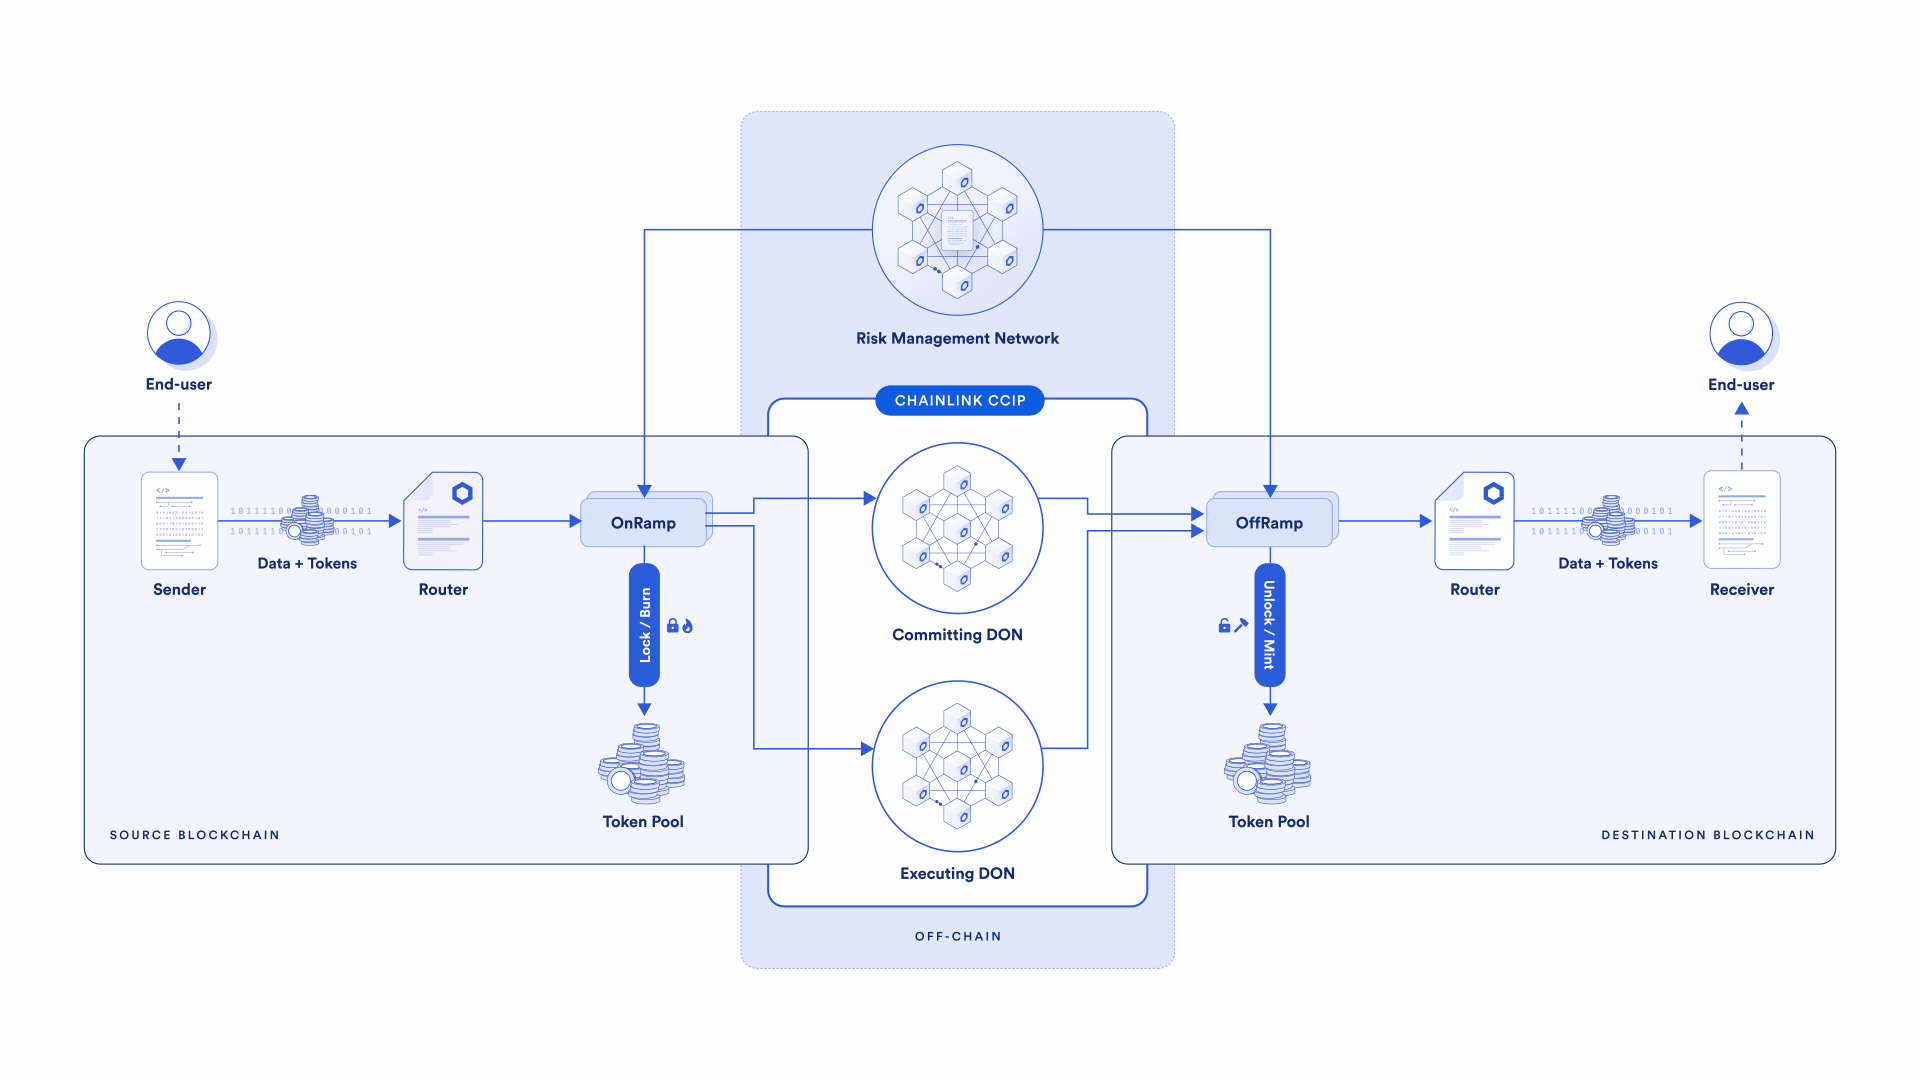 Overview of the Risk Management Network